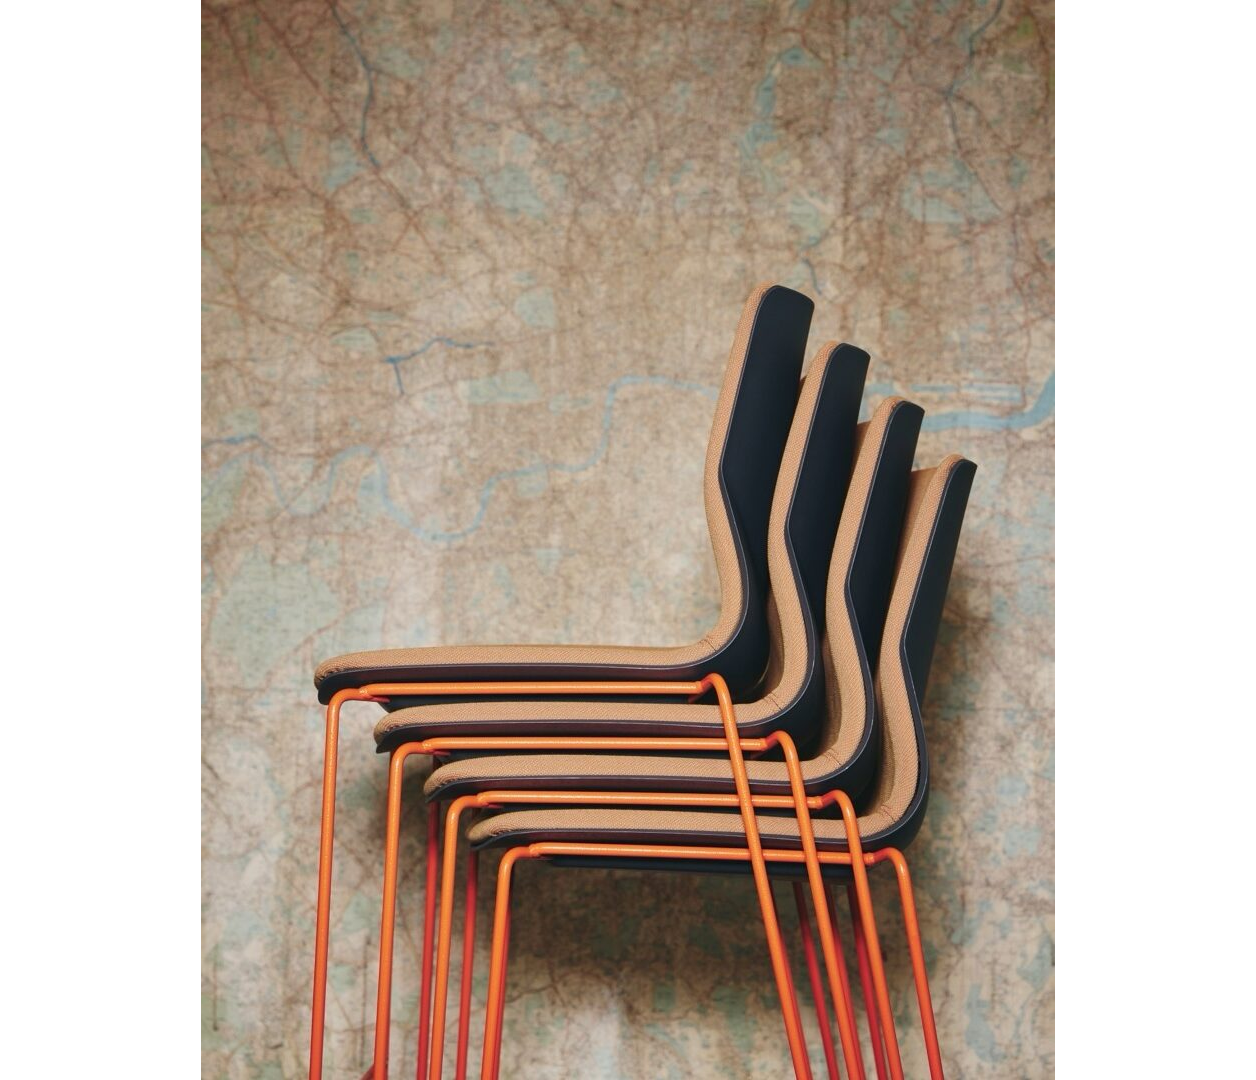 OCEE&FOUR – Chairs – FourSure 105 – Details Image 5 Large Large